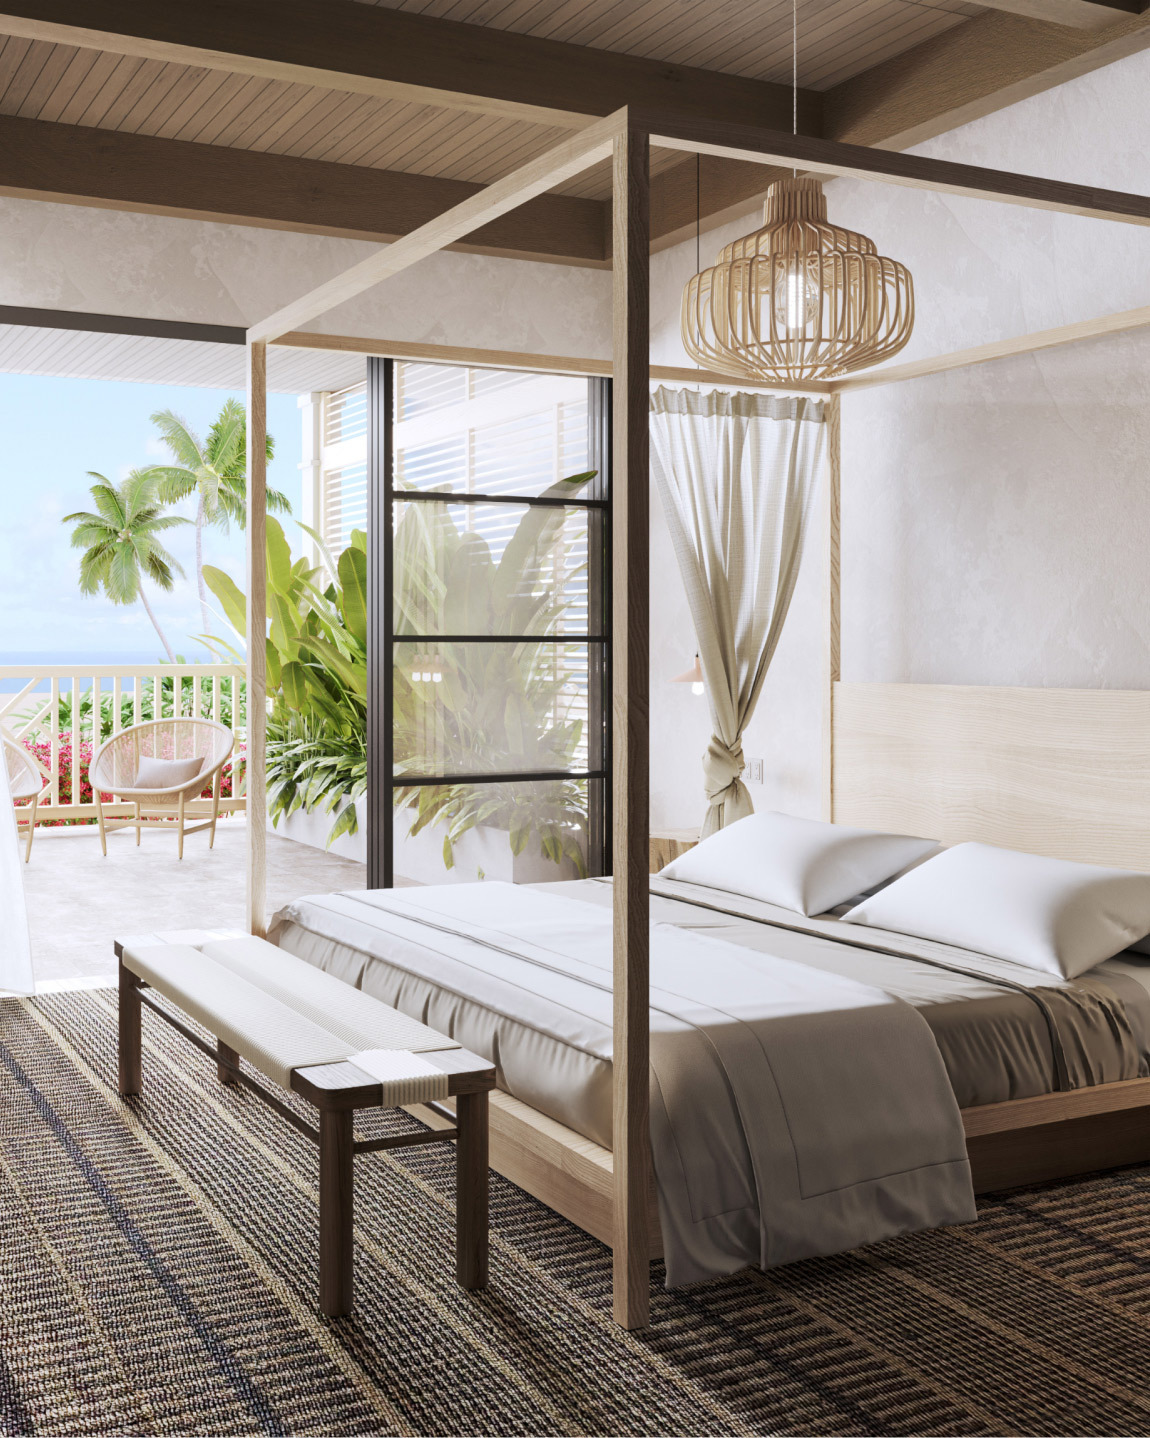 Rendering of a bedroom at The Cays